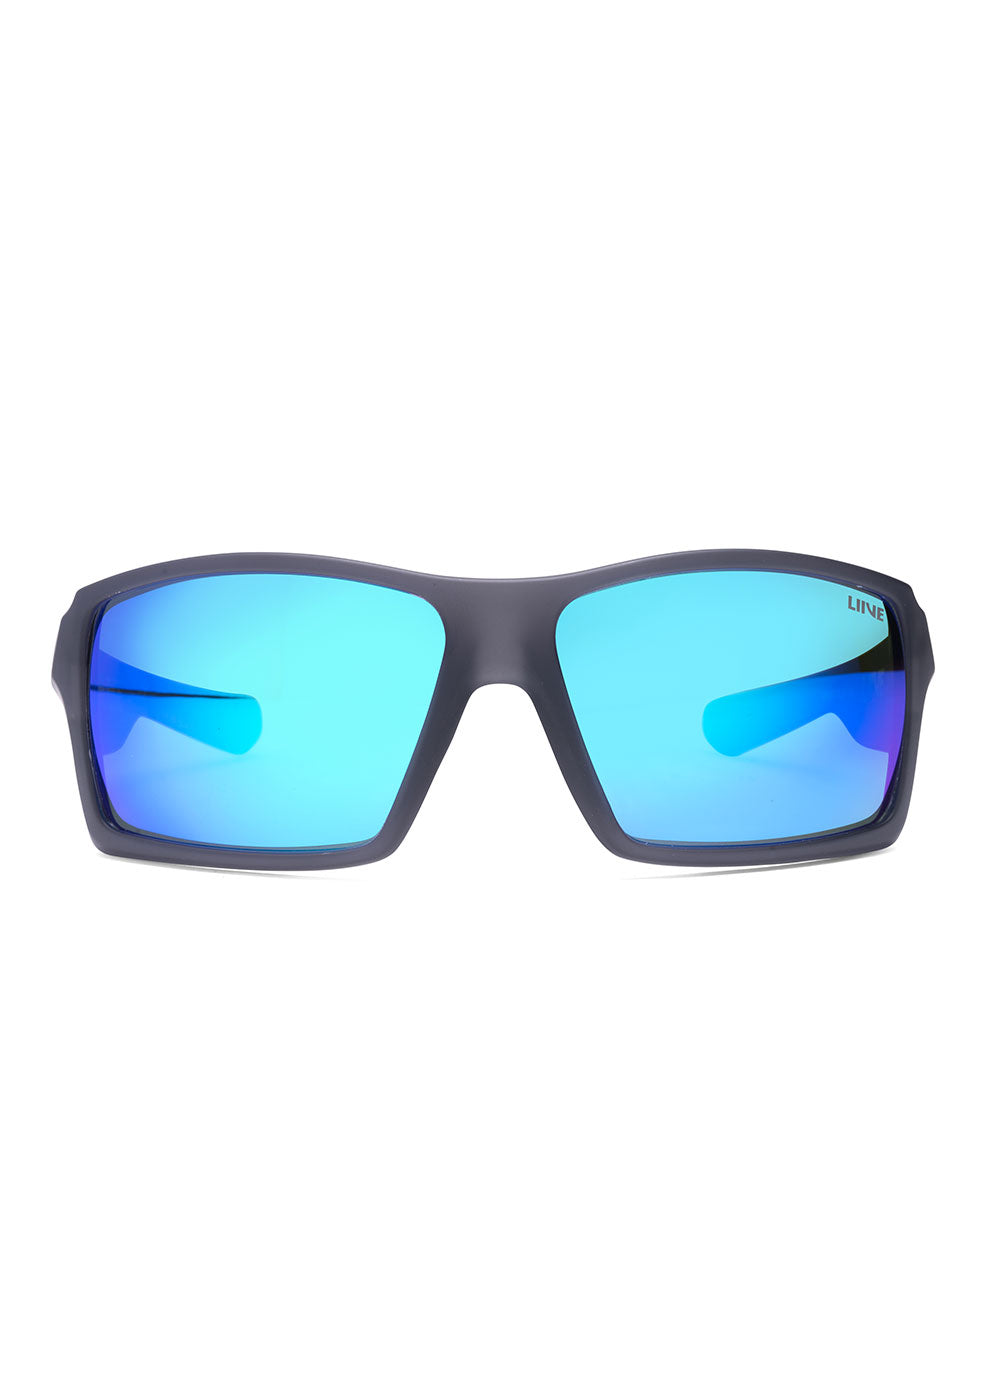 The Edge - Mirror Polarised Floating Sunglasses - Adreno - Ocean Outfitters